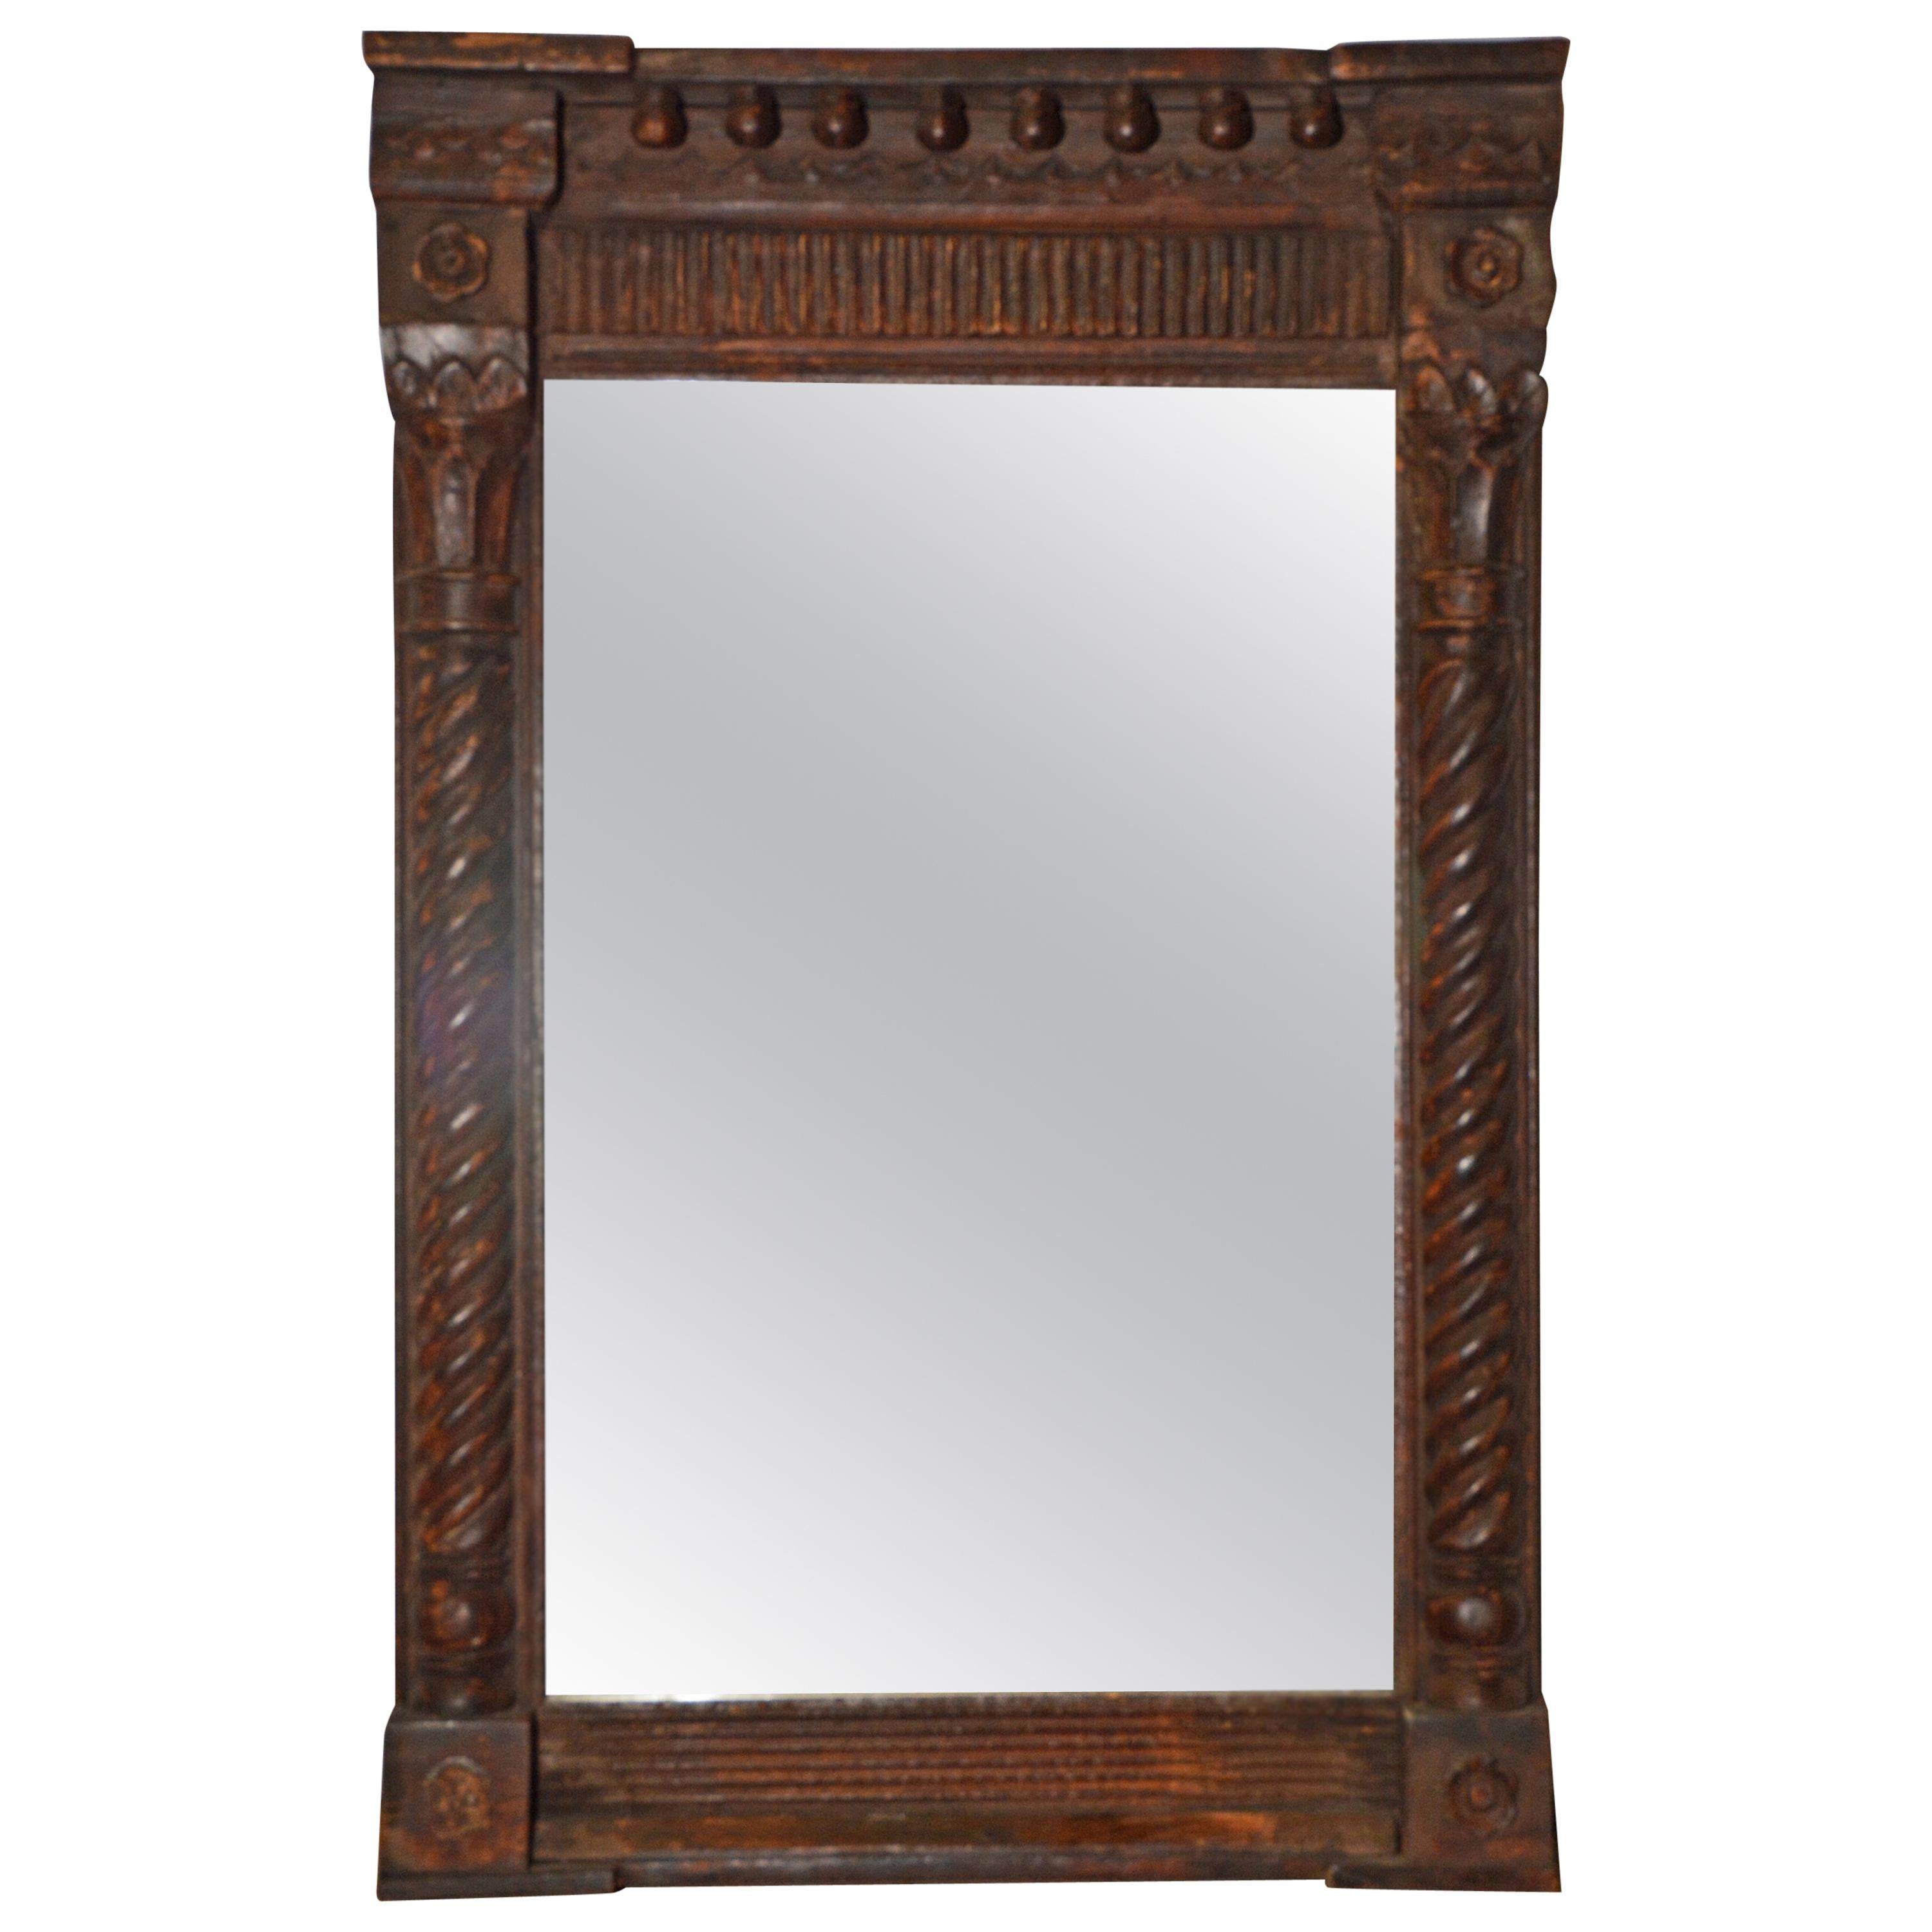 Antique Hand-Carved Wood Mirror with Classical Details